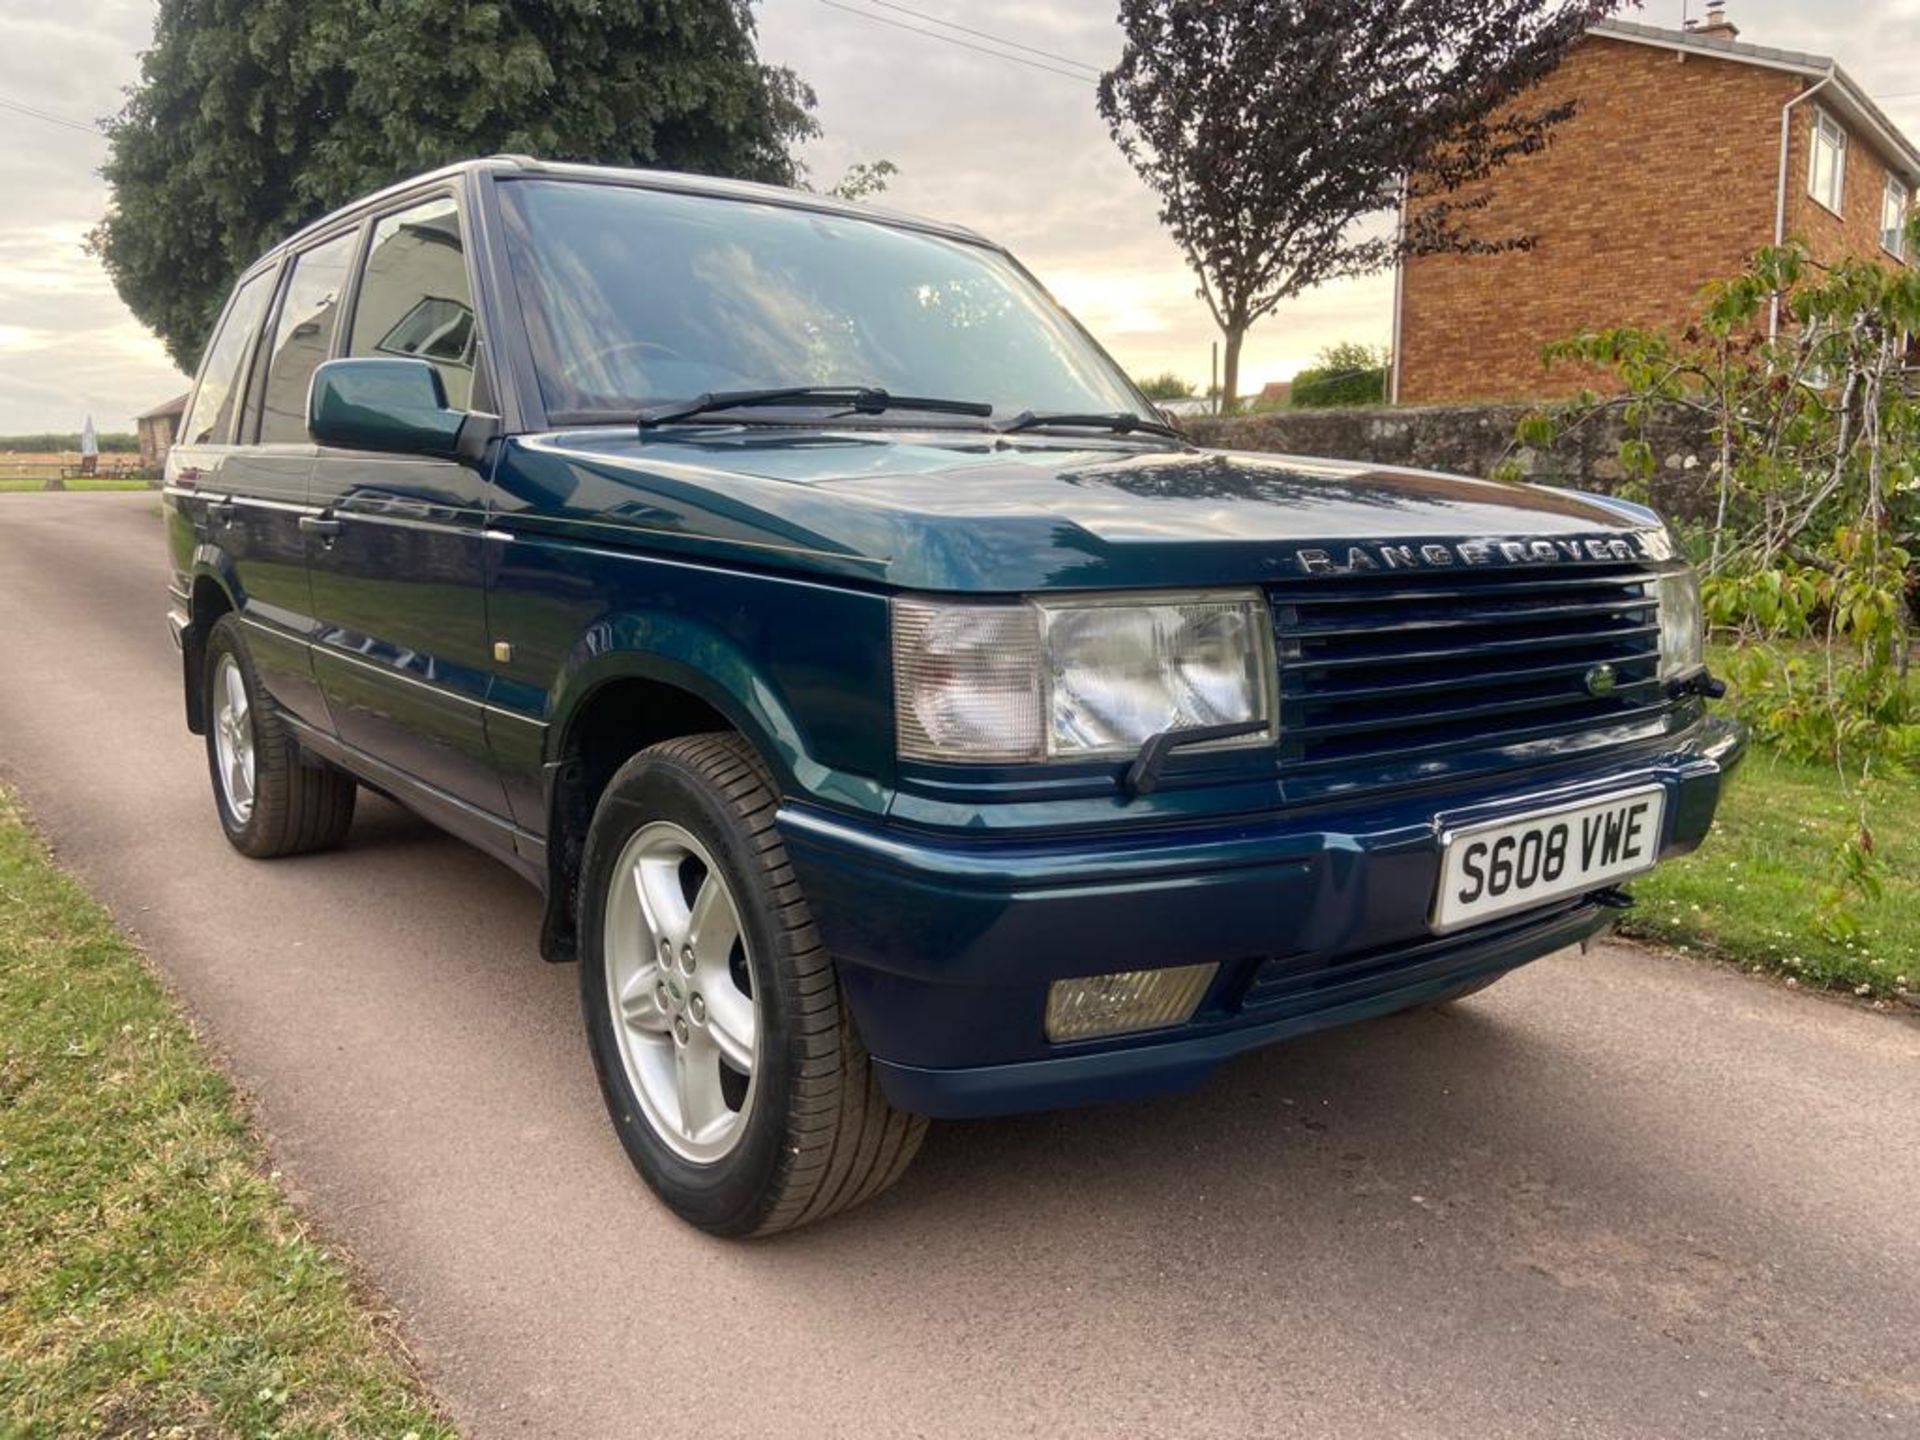 1998 Limited Edition Range Rover P38 - Image 34 of 39